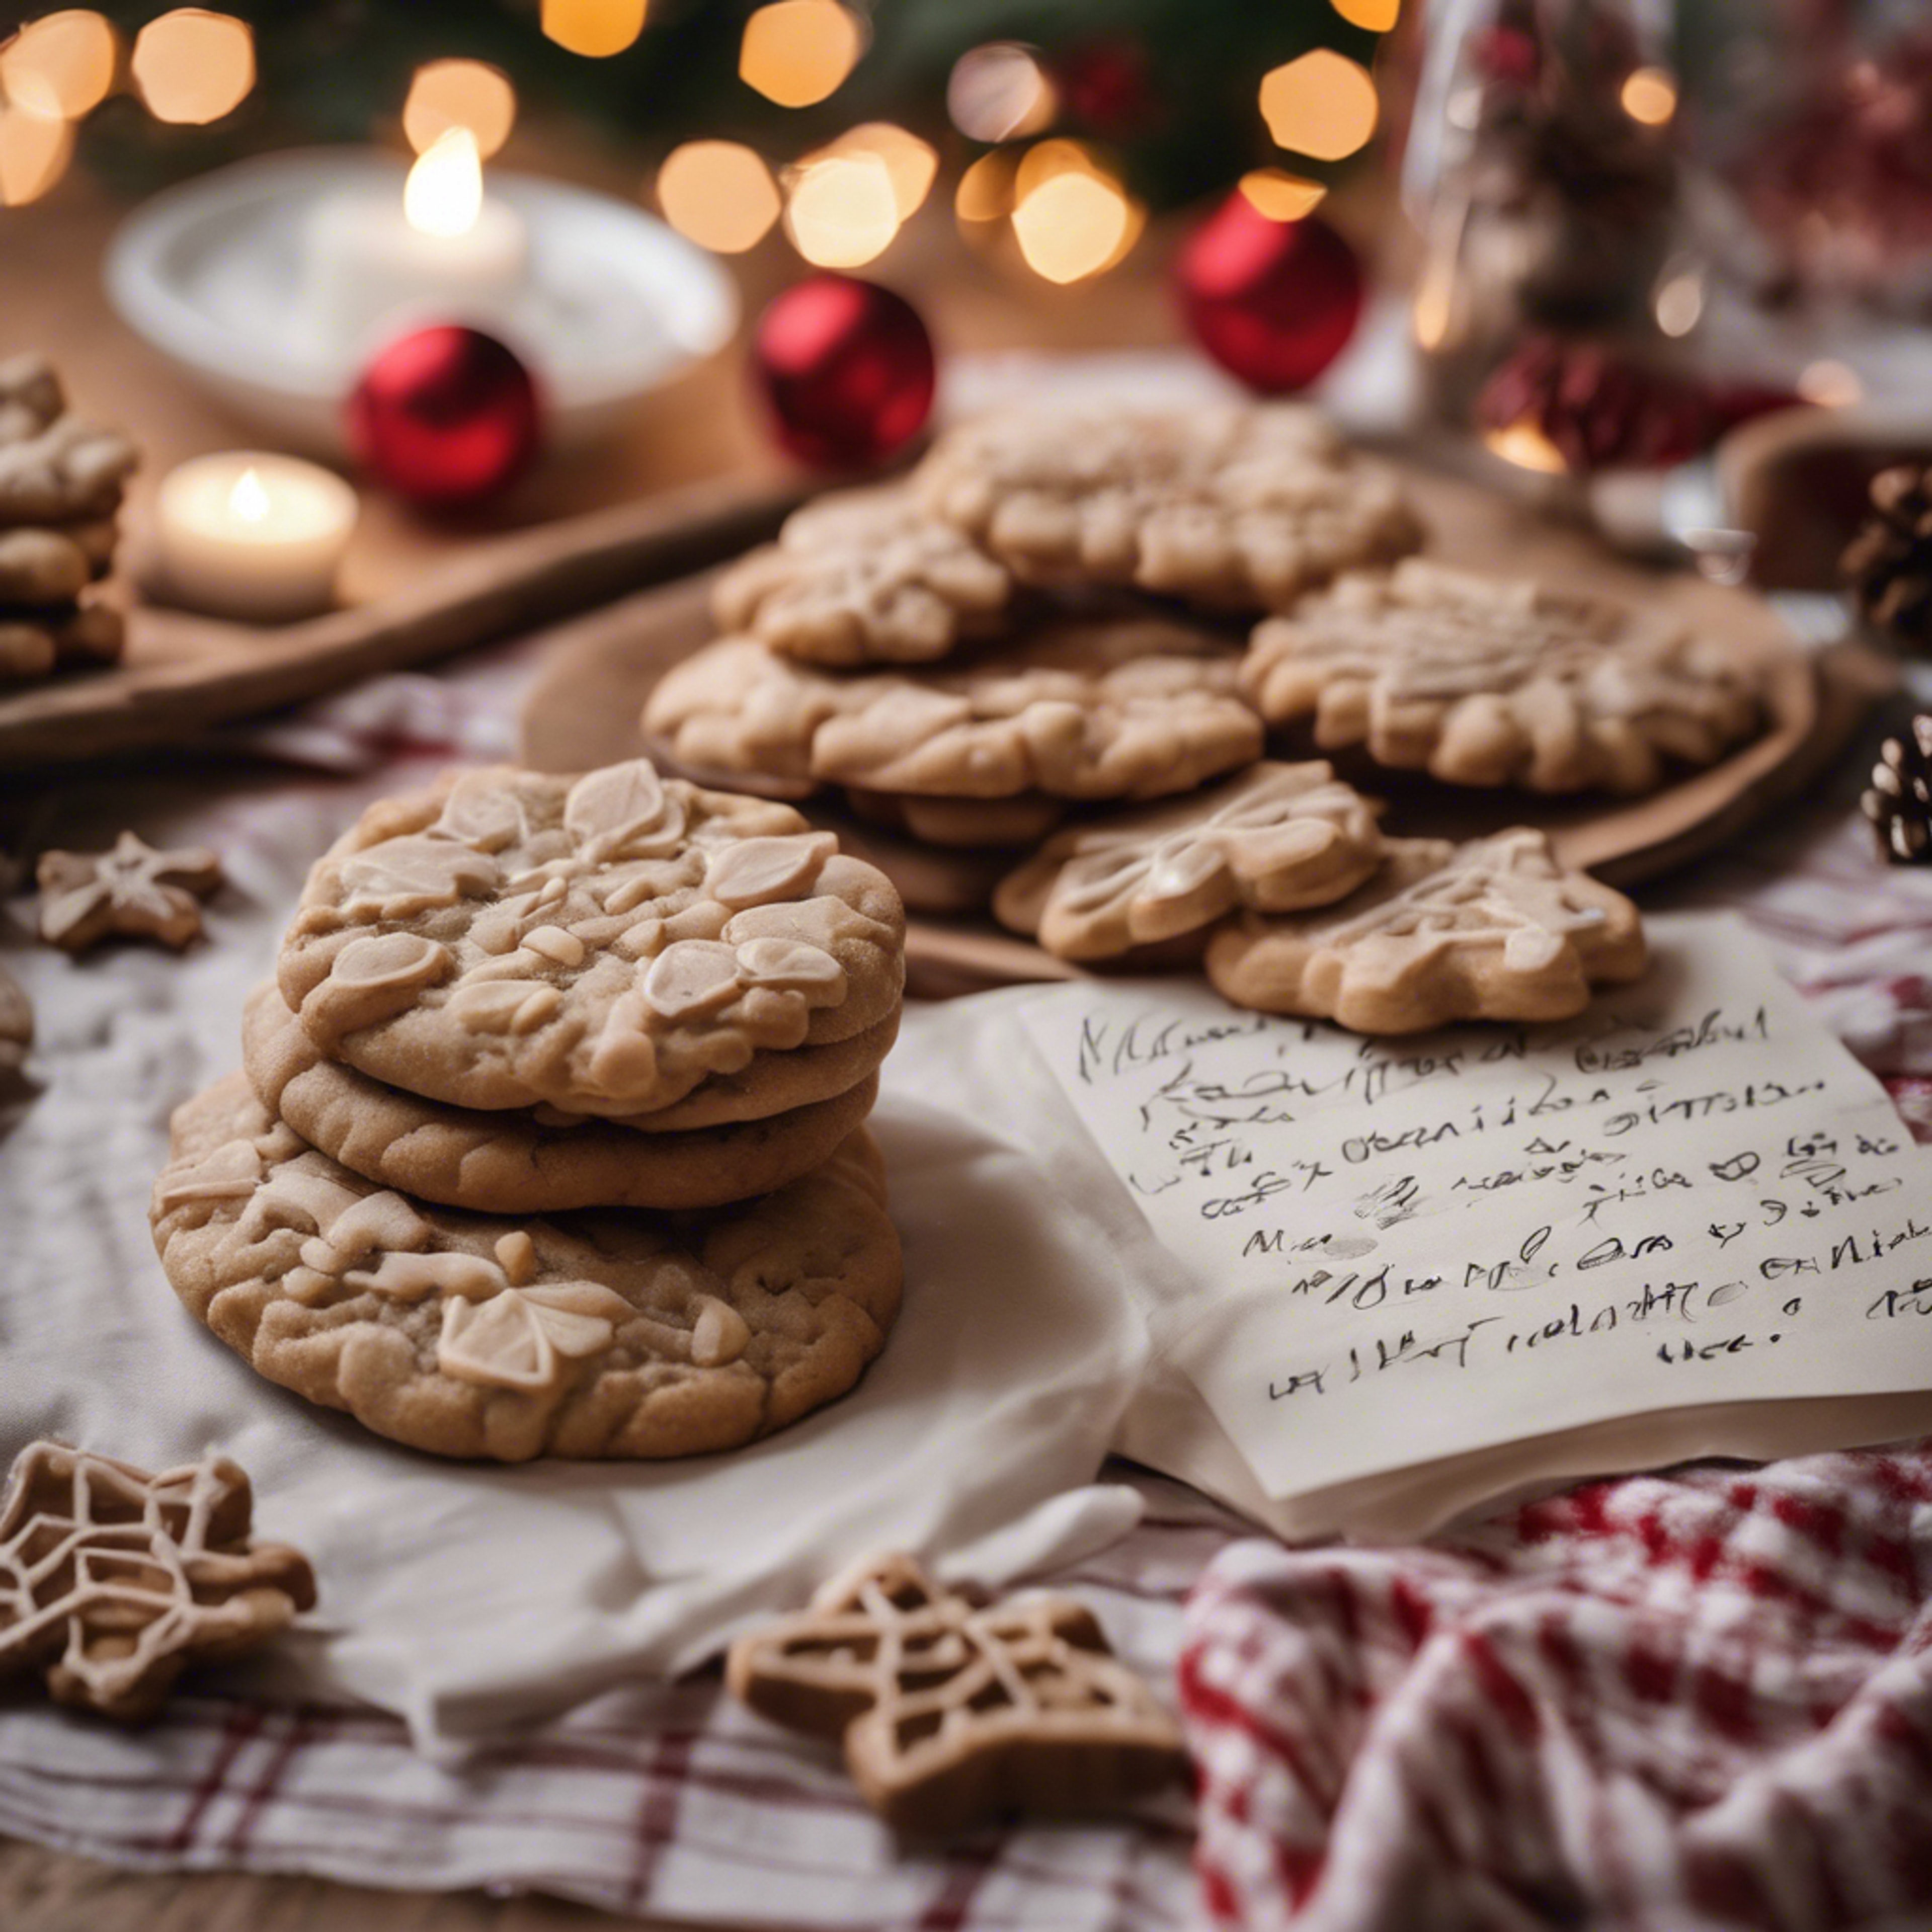 A spread of cozy, homemade Christmas cookies on a festive tablecloth, a glass of milk, and a note to Santa. Тапет[2a748ec29b0a47b6b2f7]